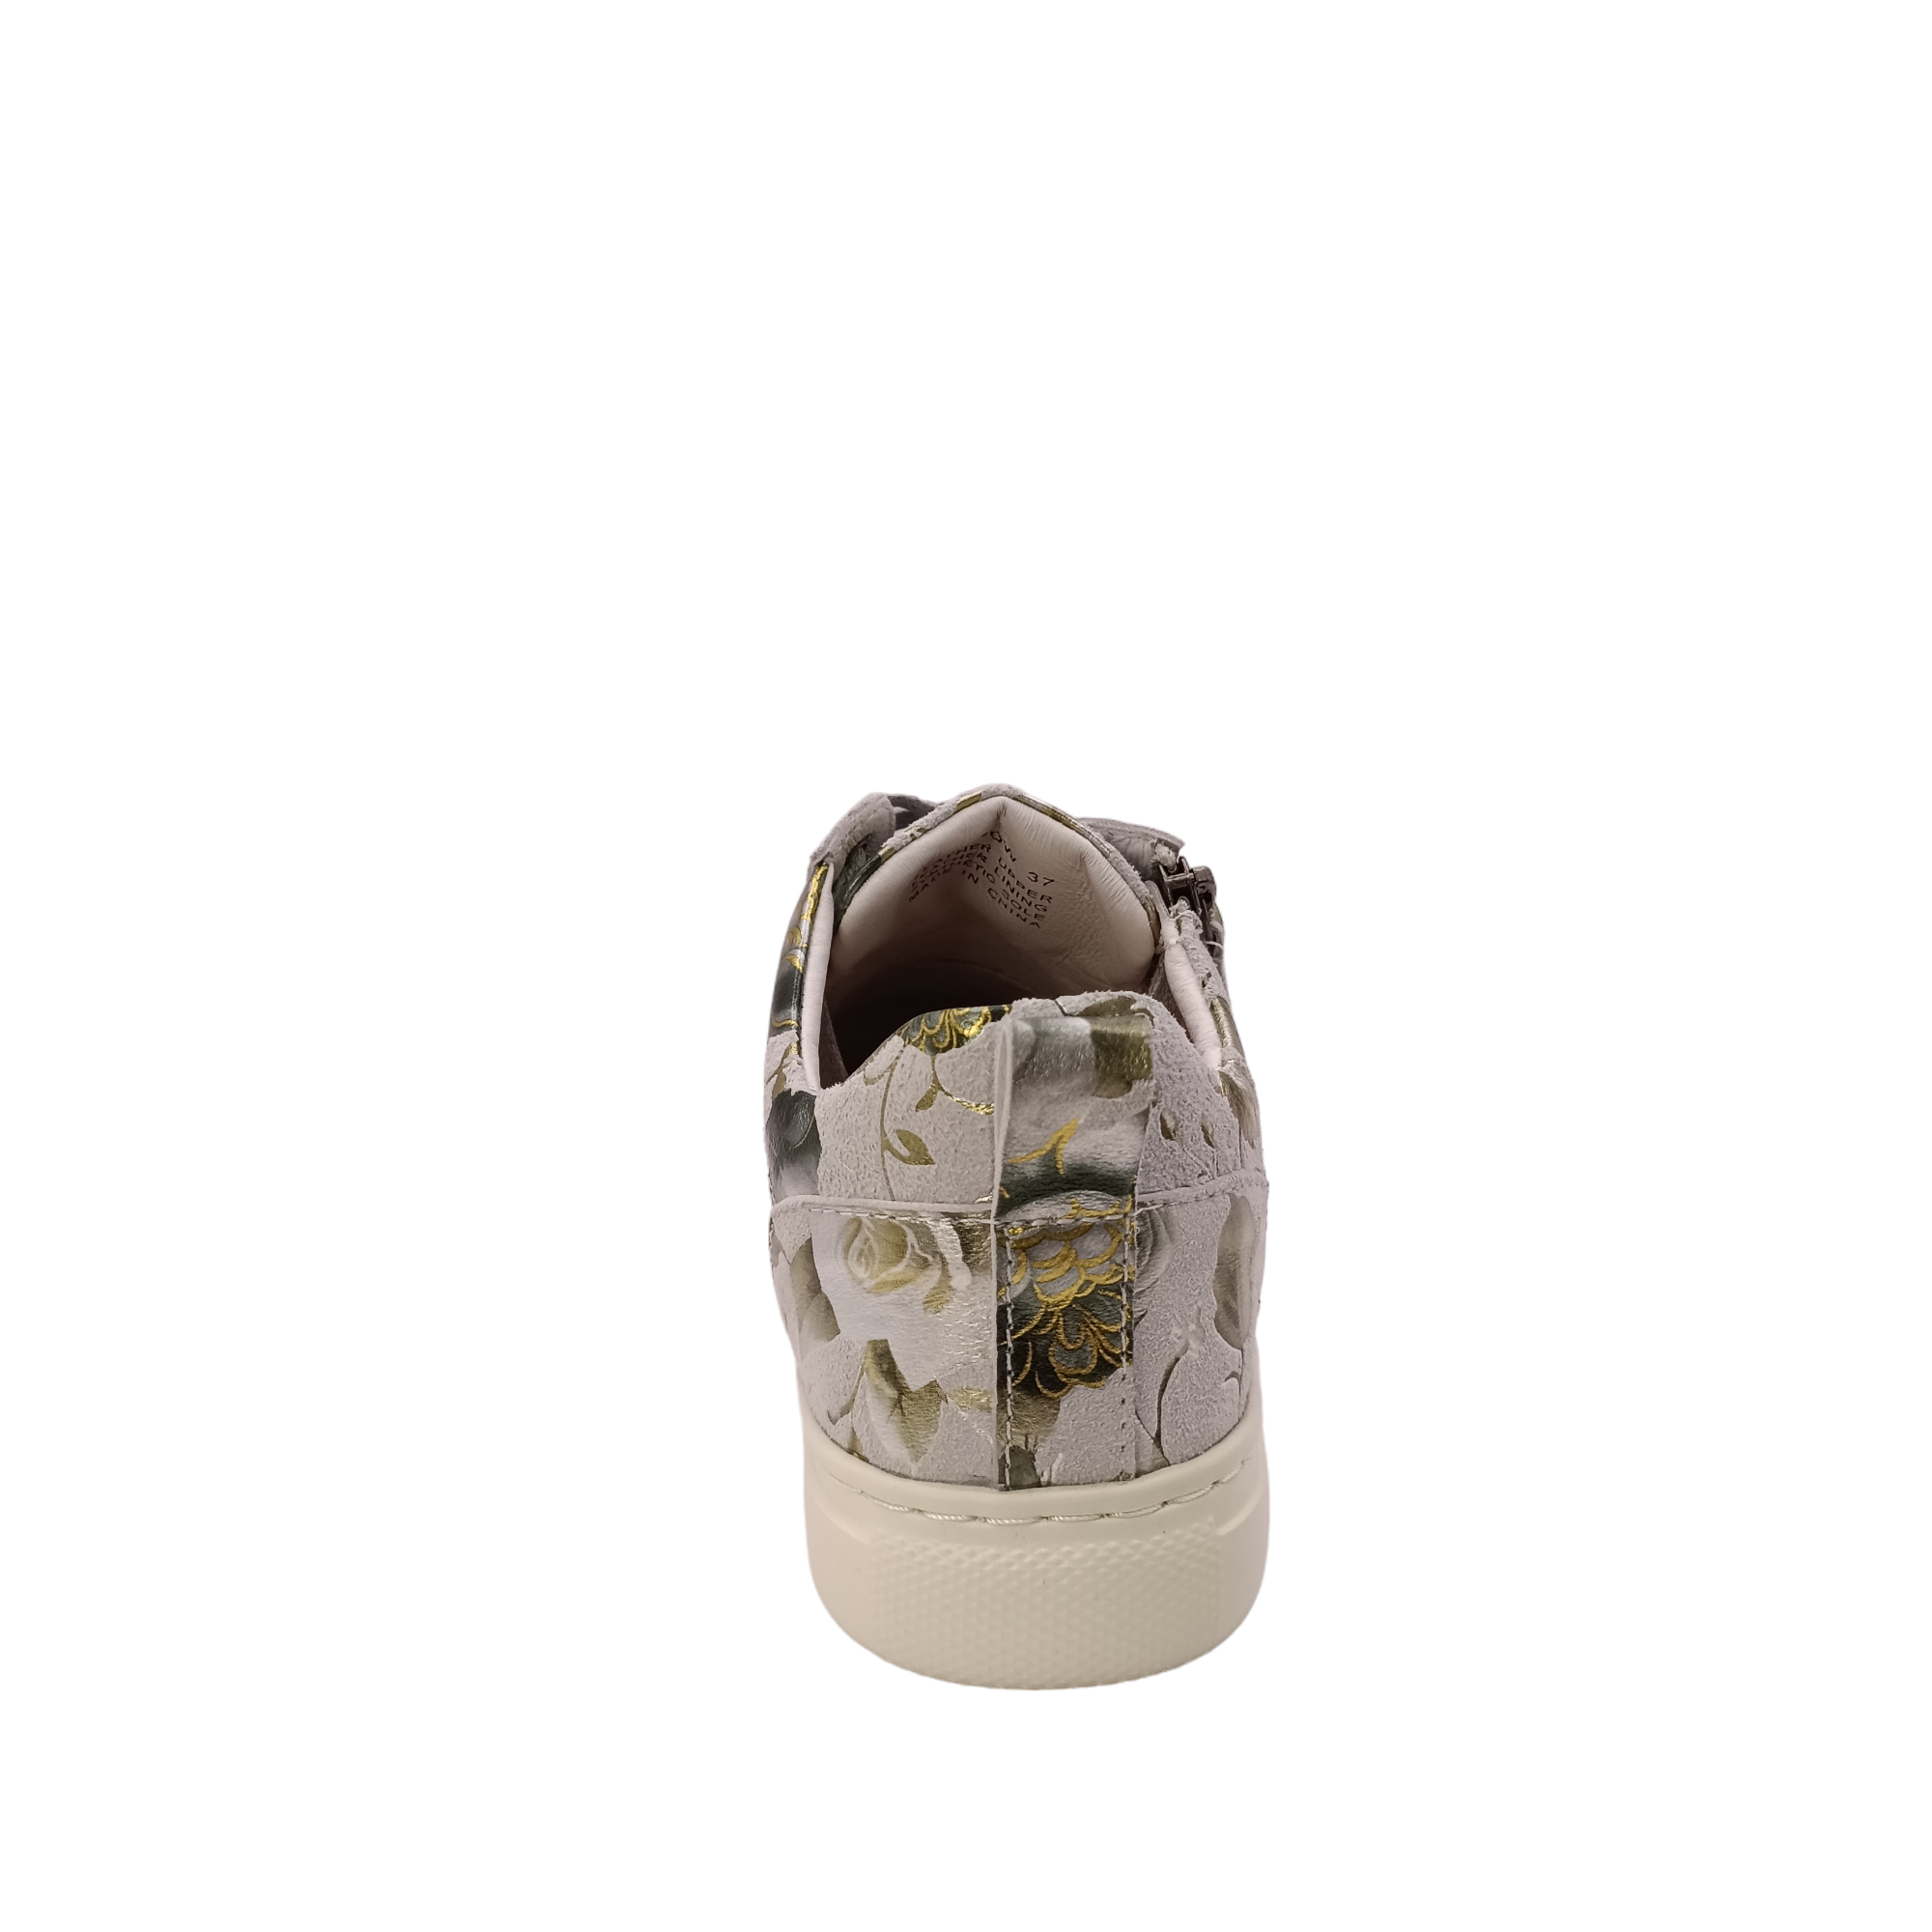 Silver sneaker with side zip. Leather printed with green and gold patterned floral design. Step into style and comfort with the stunning Cassini shoes. Featuring a unique floral and metallic pattern, these women&#39;s shoes offer the perfect blend of fashion and function. These&amp;nbsp;Cassini shoes are sure to become your new go-to for comfortable style